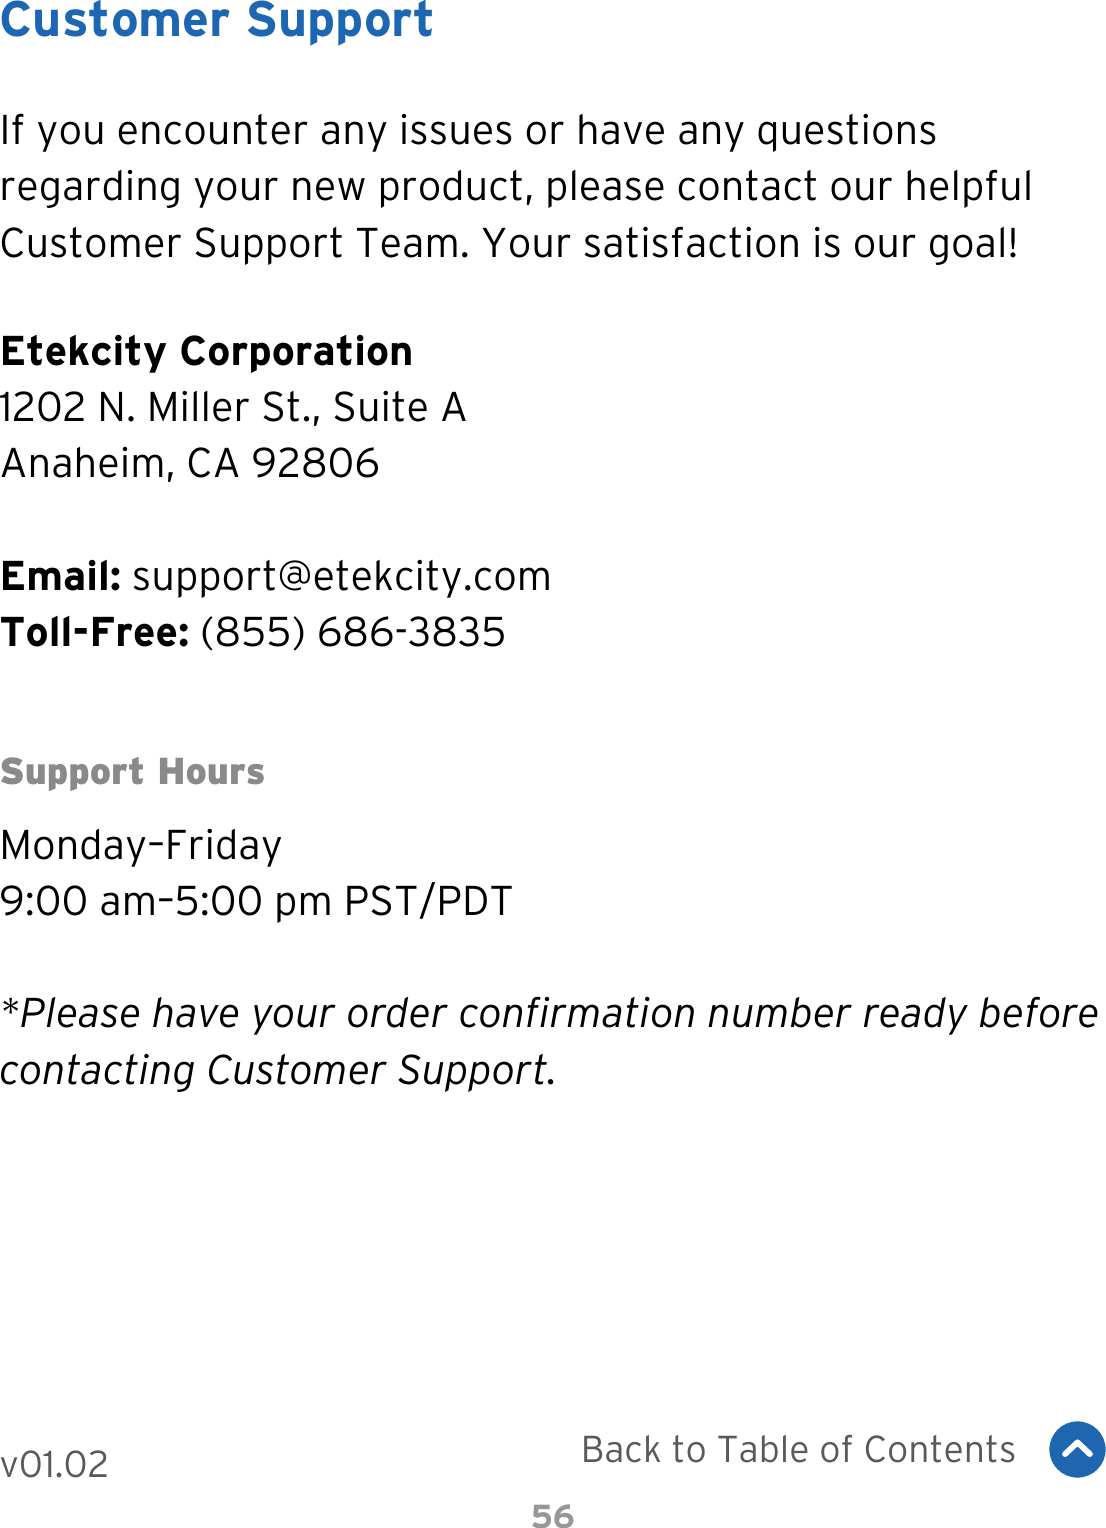 56Customer SupportIf you encounter any issues or have any questions regarding your new product, please contact our helpful Customer Support Team. Your satisfaction is our goal!Etekcity Corporation1202 N. Miller St., Suite AAnaheim, CA 92806Email: support@etekcity.comToll-Free: (855) 686-3835Support HoursMonday–Friday9:00 am–5:00 pm PST/PDT*Please have your order confirmation number ready before contacting Customer Support.Back to Table of Contentsv01.02